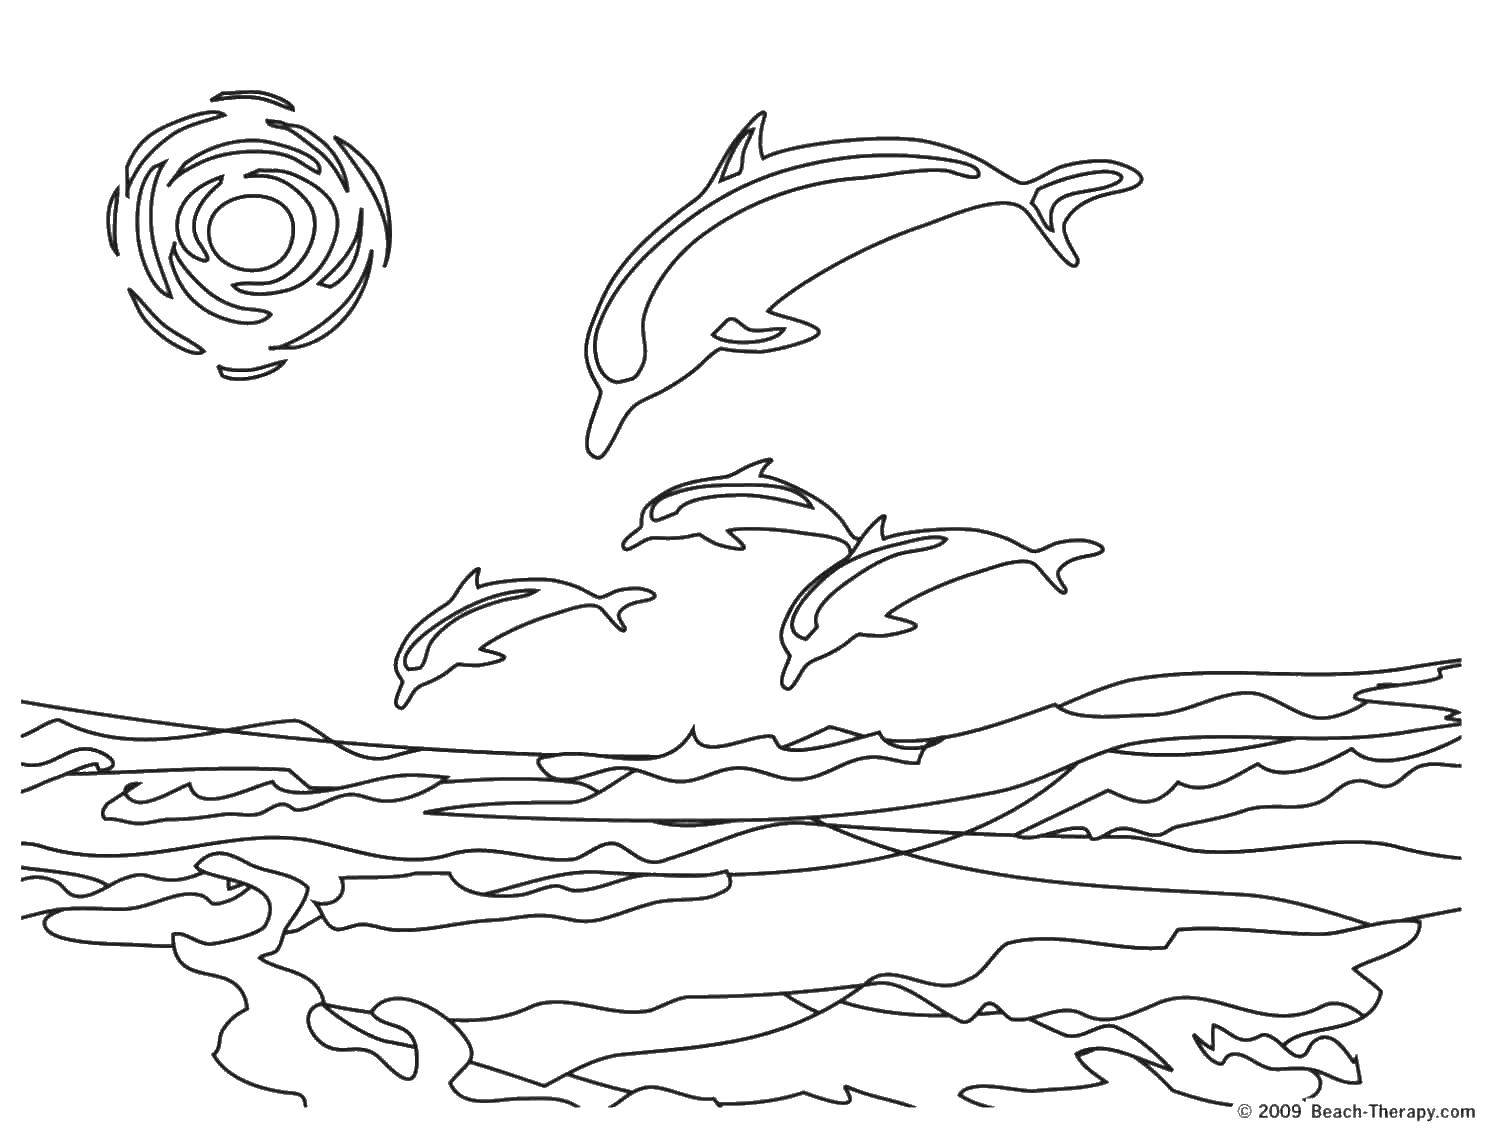 Coloring A flock of dolphins. Category marine. Tags:  Underwater world, Dolphin.